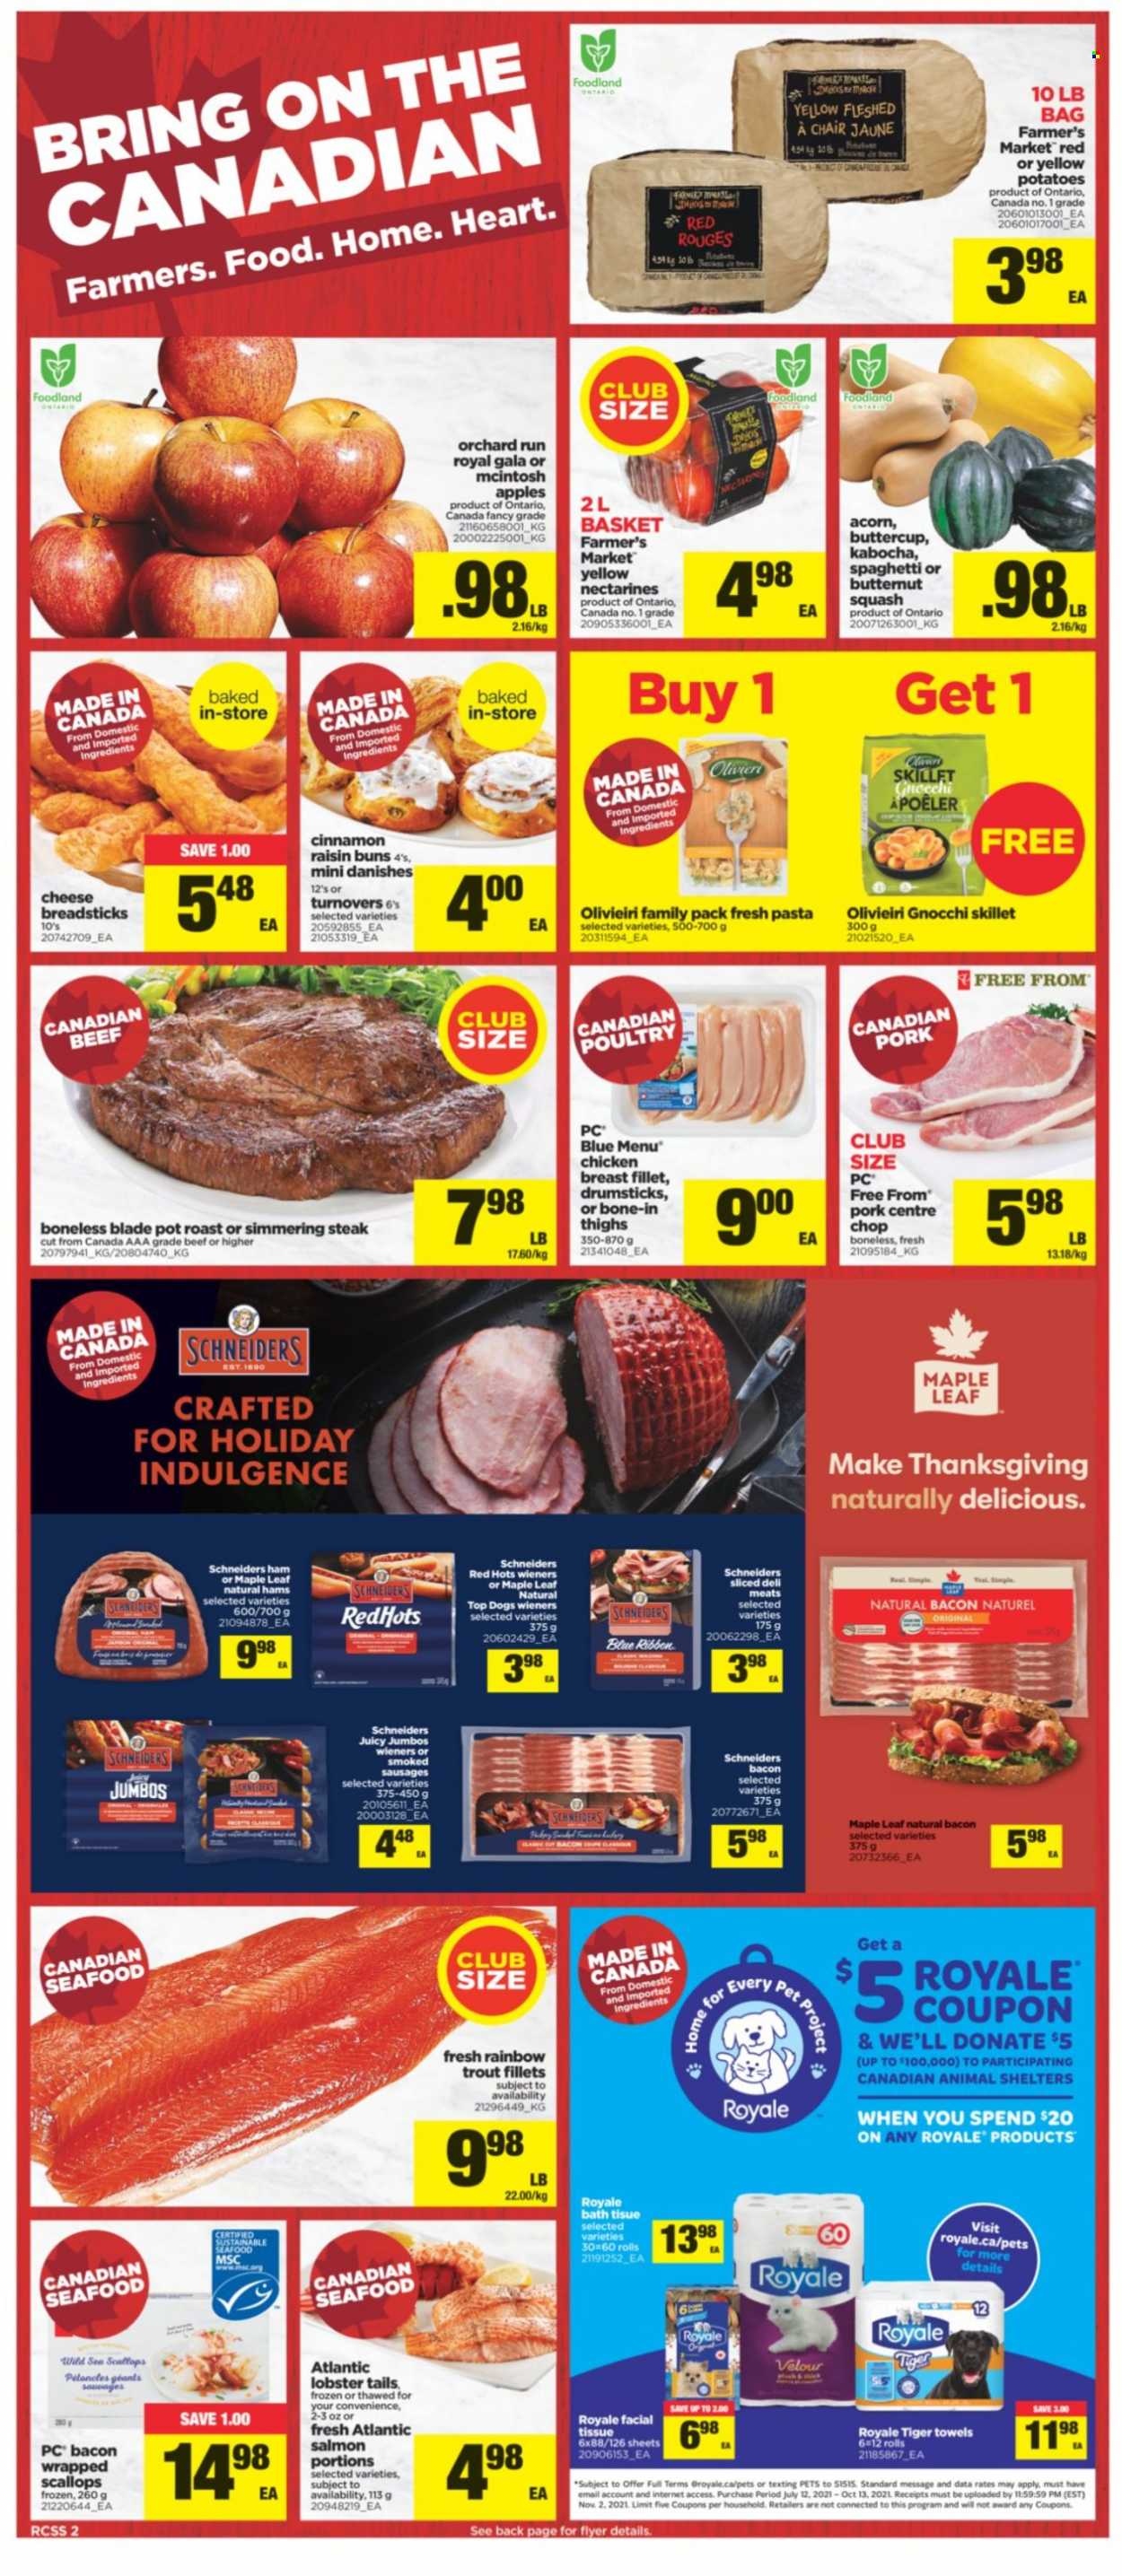 thumbnail - Real Canadian Superstore Flyer - September 16, 2021 - September 22, 2021 - Sales products - Blue Ribbon, buns, turnovers, butternut squash, potatoes, apples, Gala, nectarines, lobster, salmon, scallops, trout, lobster tail, spaghetti, bacon, ham, sausage, cheese, bread sticks, chicken breasts, chicken, tissues, pot, towel, McIntosh, chair, basket, gnocchi, steak. Page 2.